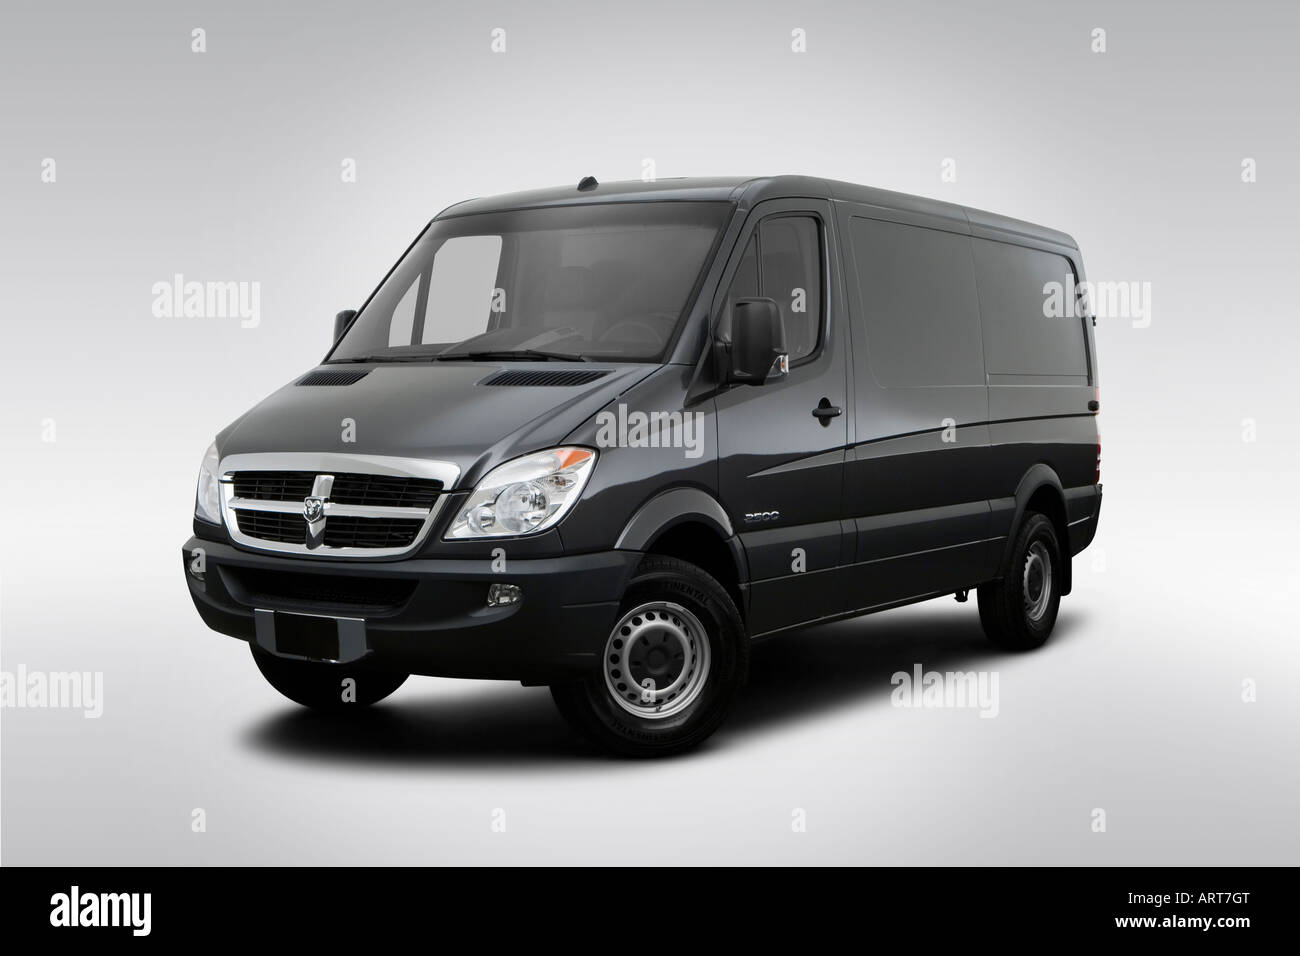 2008 Dodge Sprinter 2500 Cargo in Gray - Front angle view Stock Photo